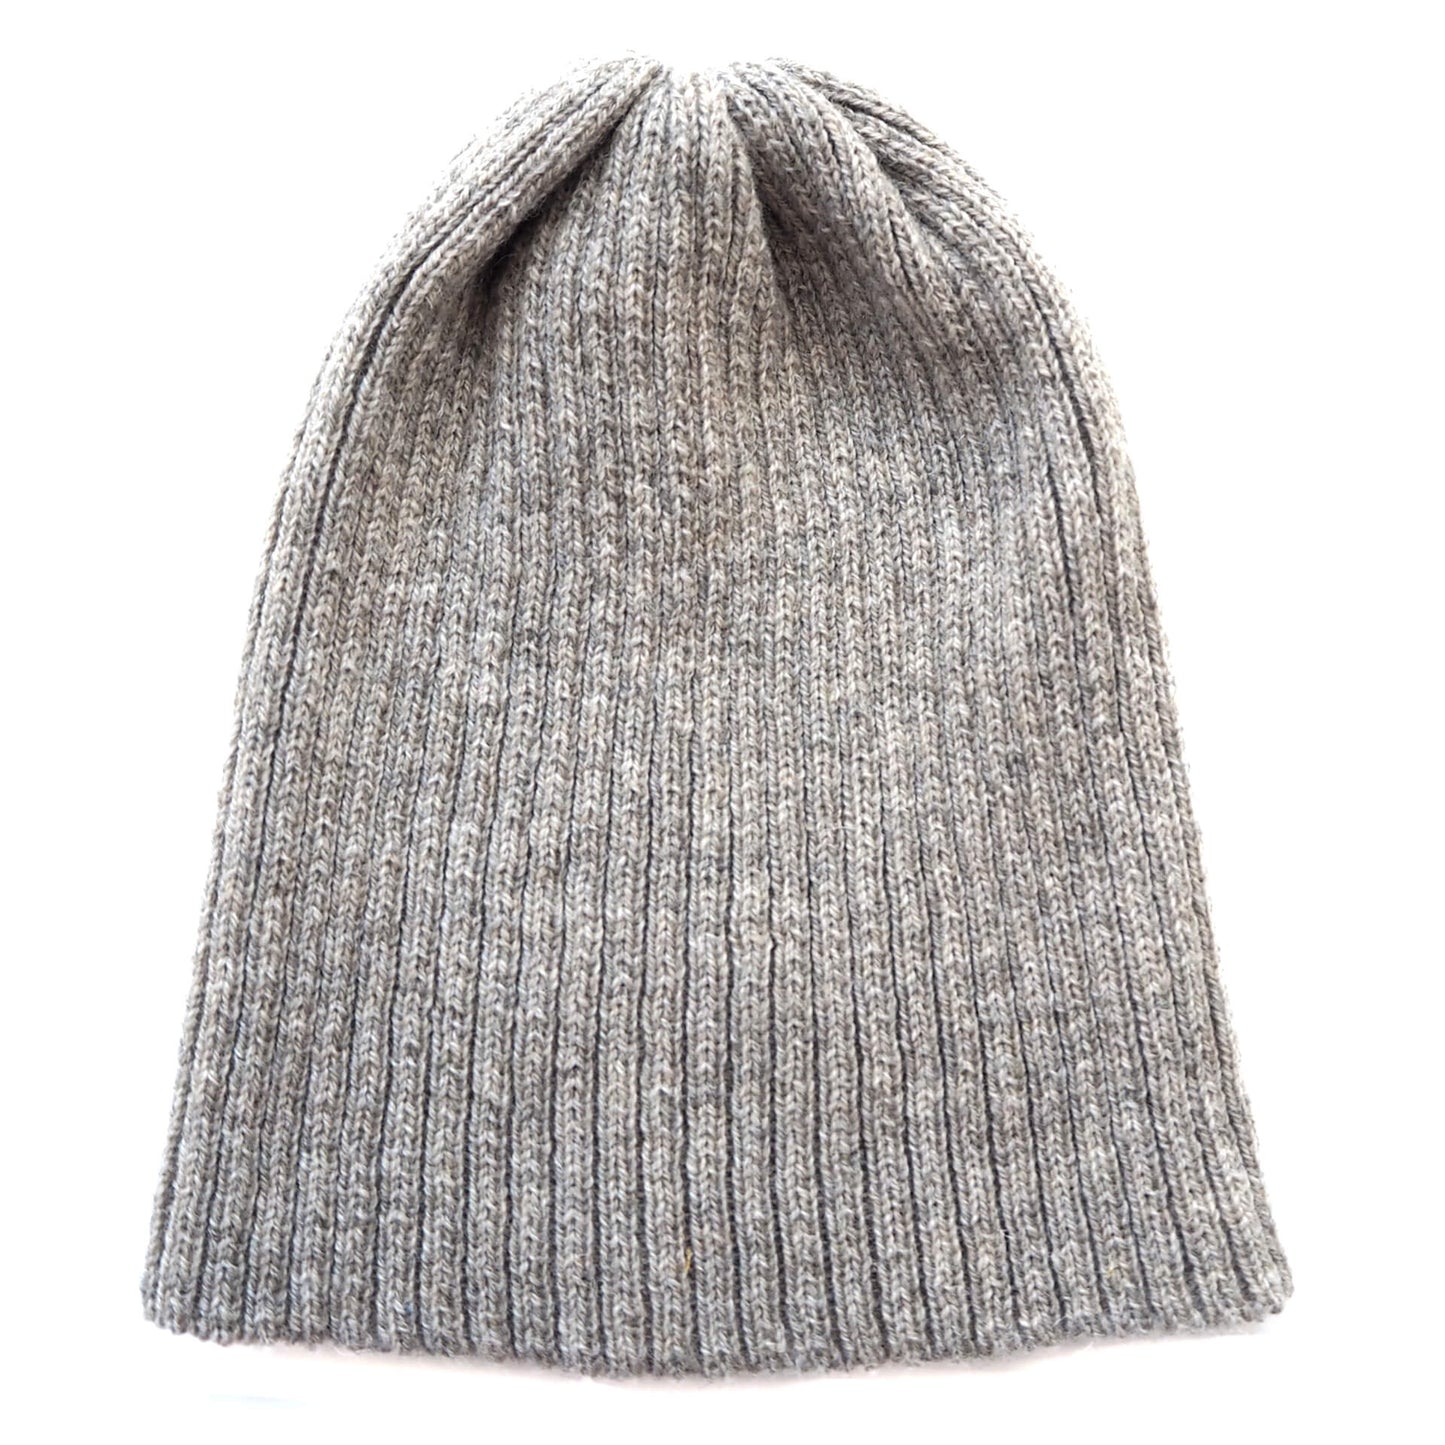 A grey ribbed beanie without a folded brim, by K.Moods. It is on a white background.